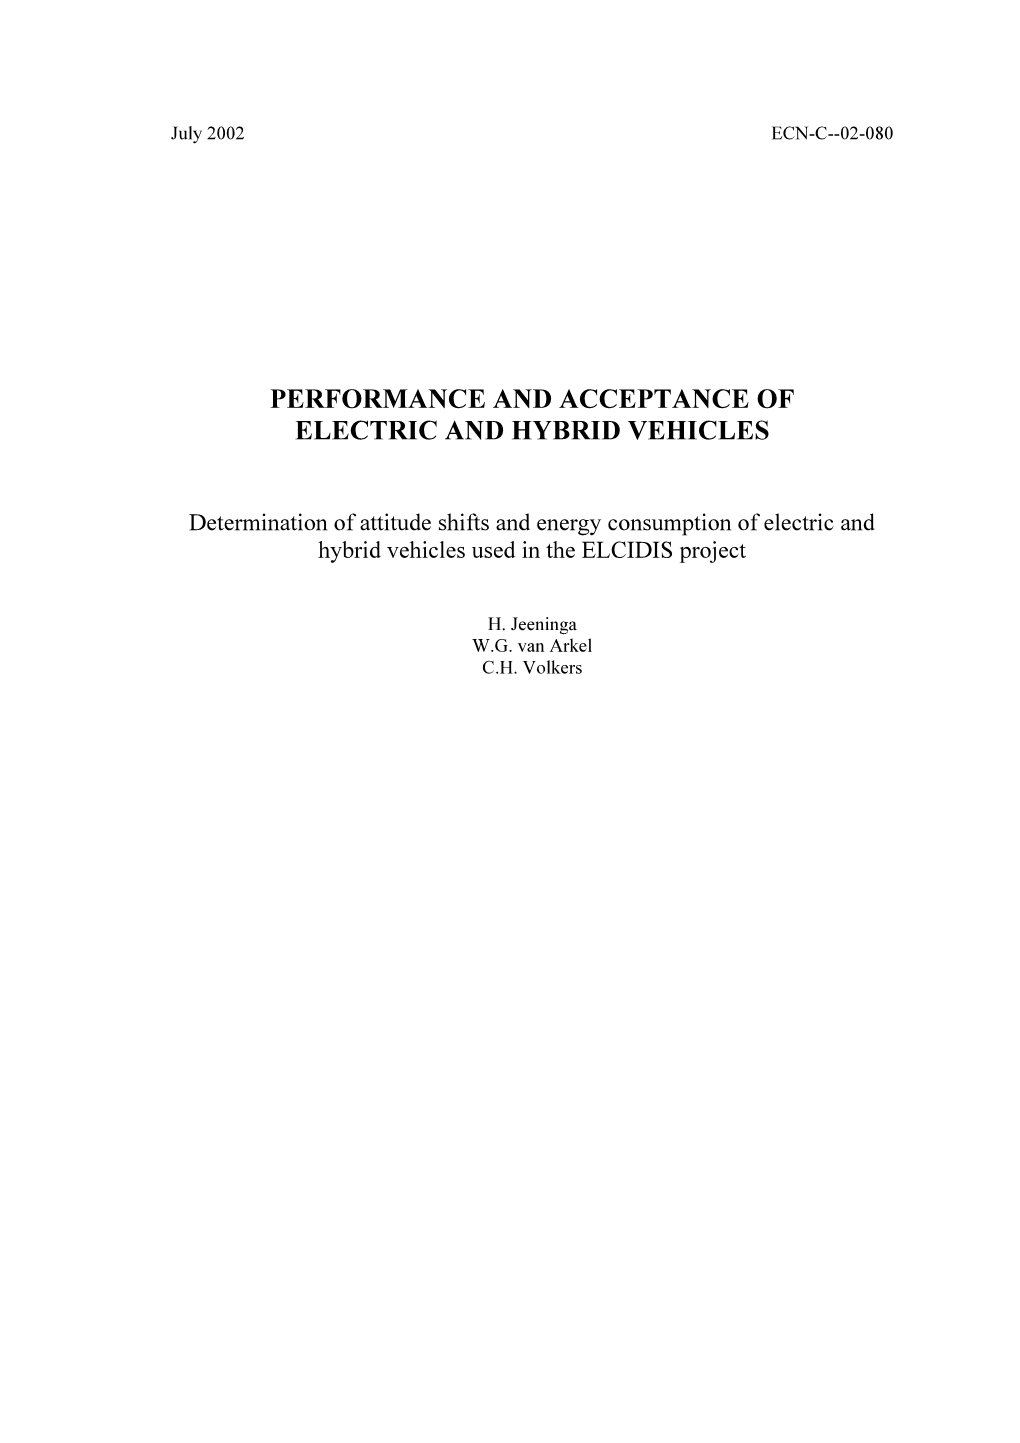 Performance and Acceptance of Electric and Hybrid Vehicles